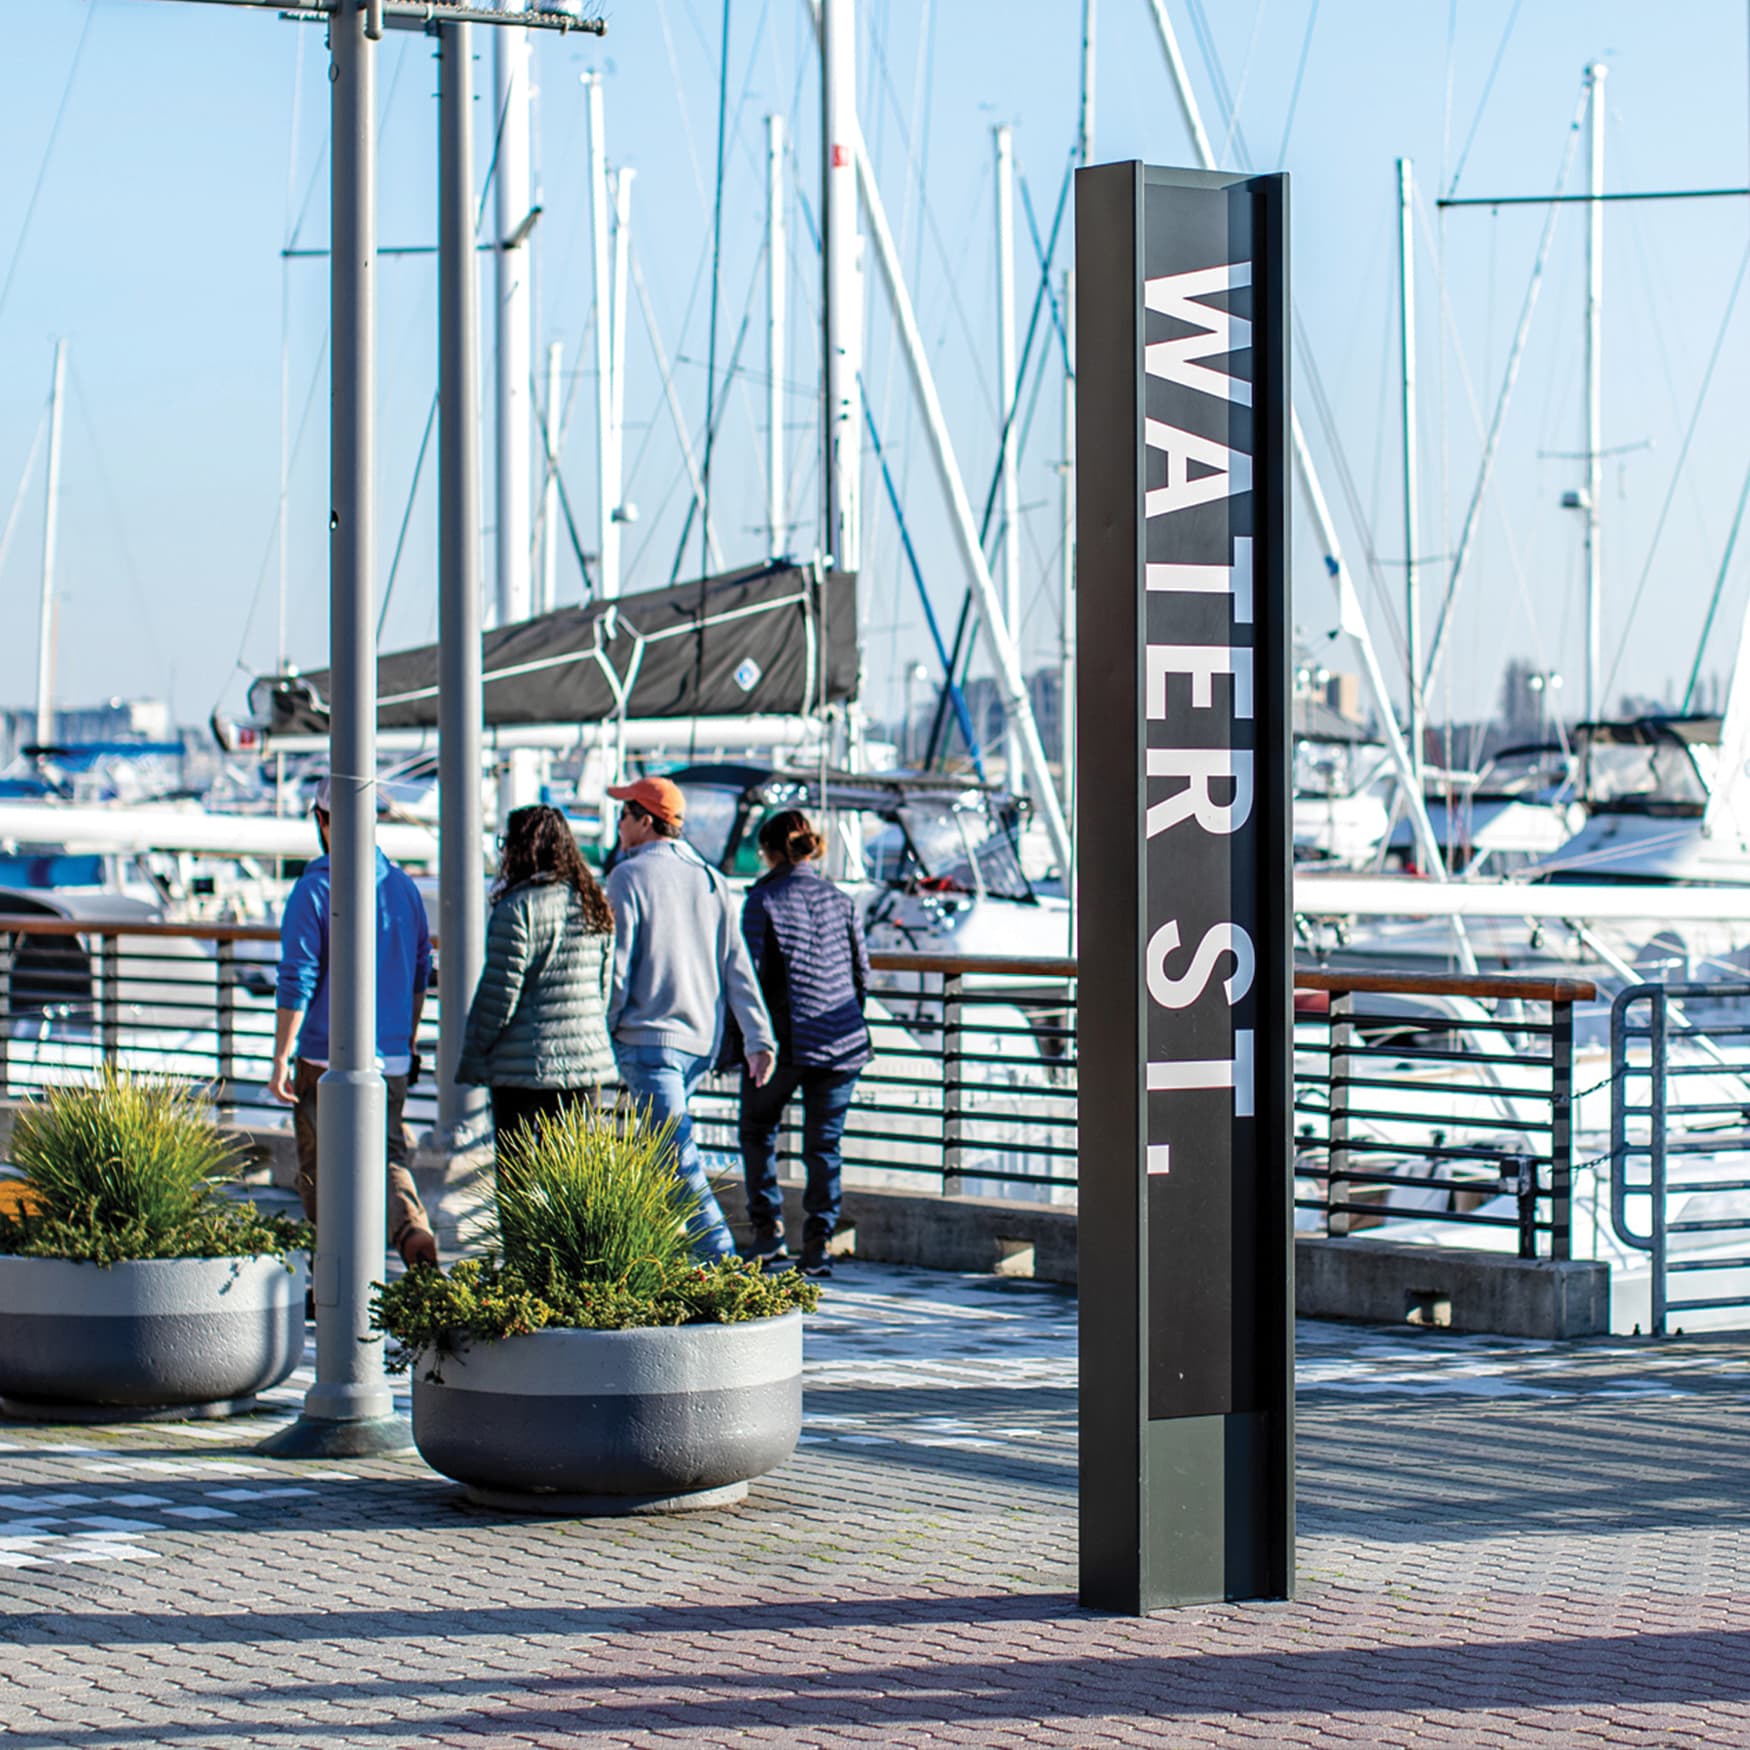 Waterfront wayfinding signage on the boardwalk with boats docked in the background